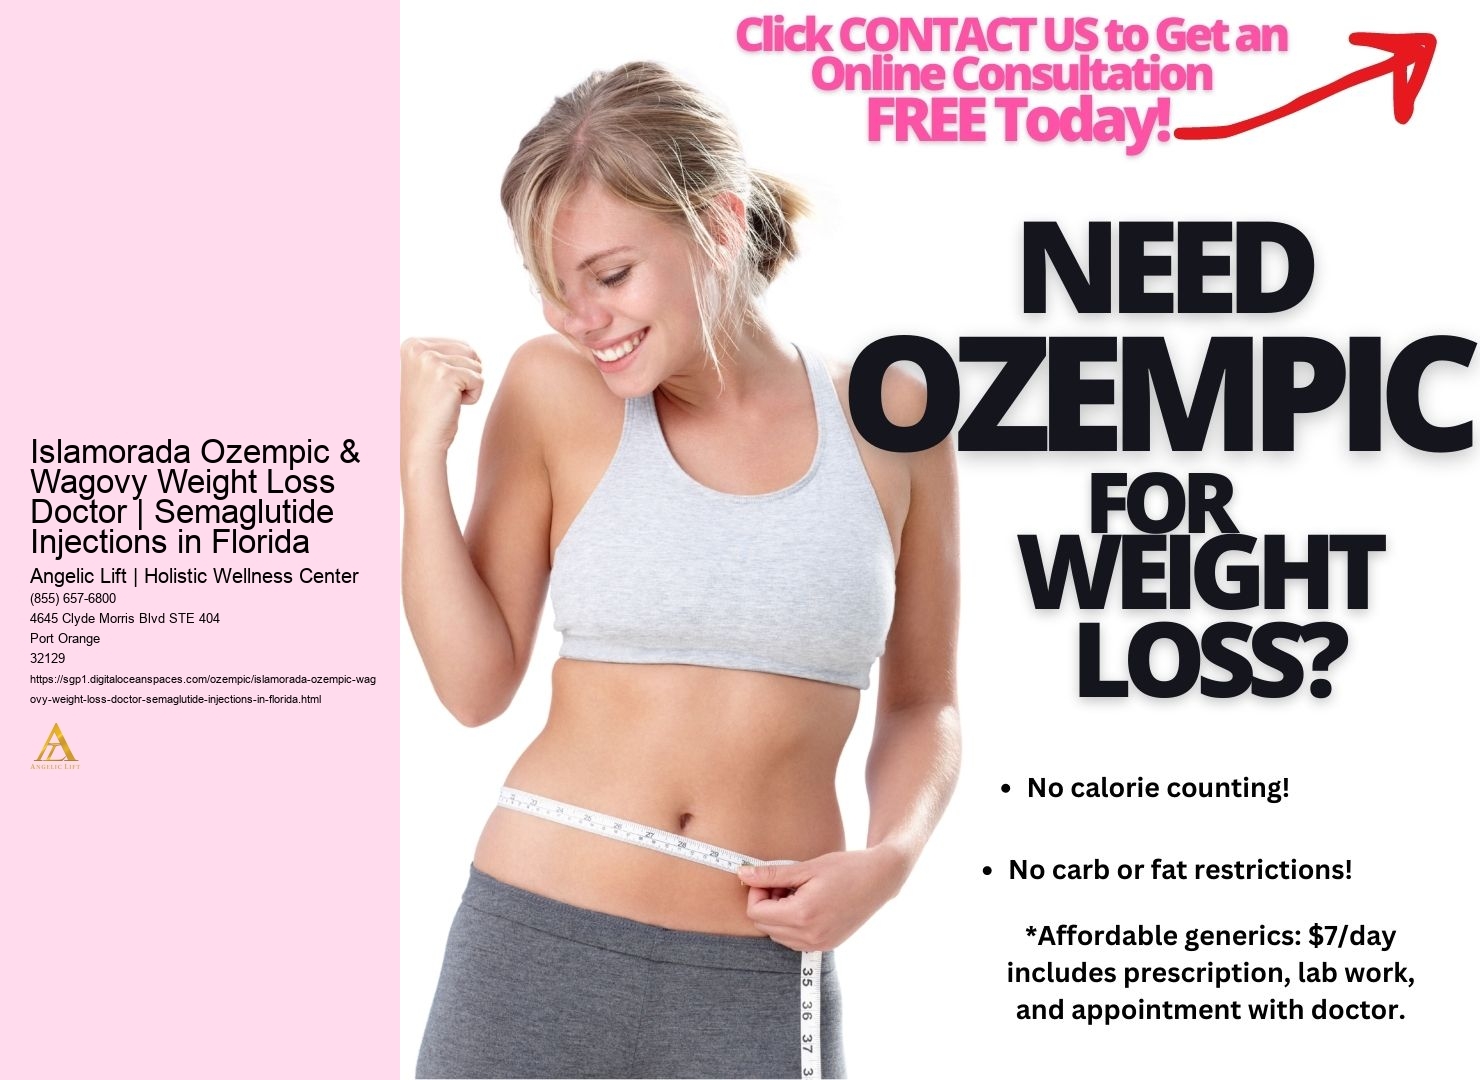 Islamorada Ozempic & Wagovy Weight Loss Doctor | Semaglutide Injections in Florida